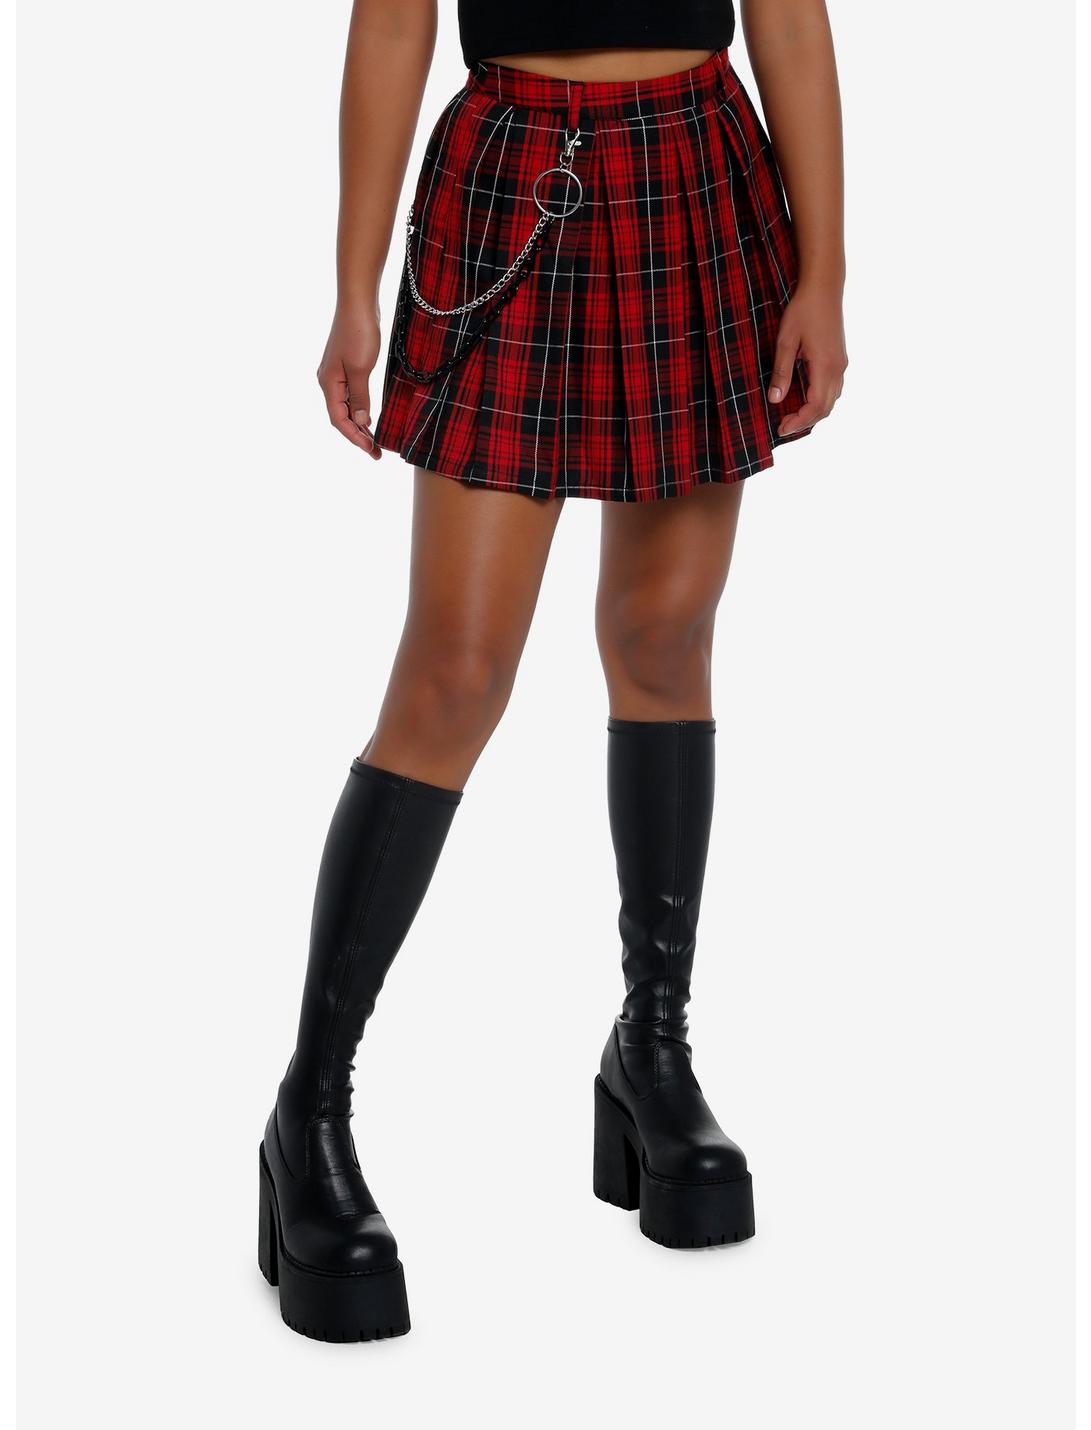 Social Collision Red Plaid Side Chain Pleated Skirt, BLACK, hi-res